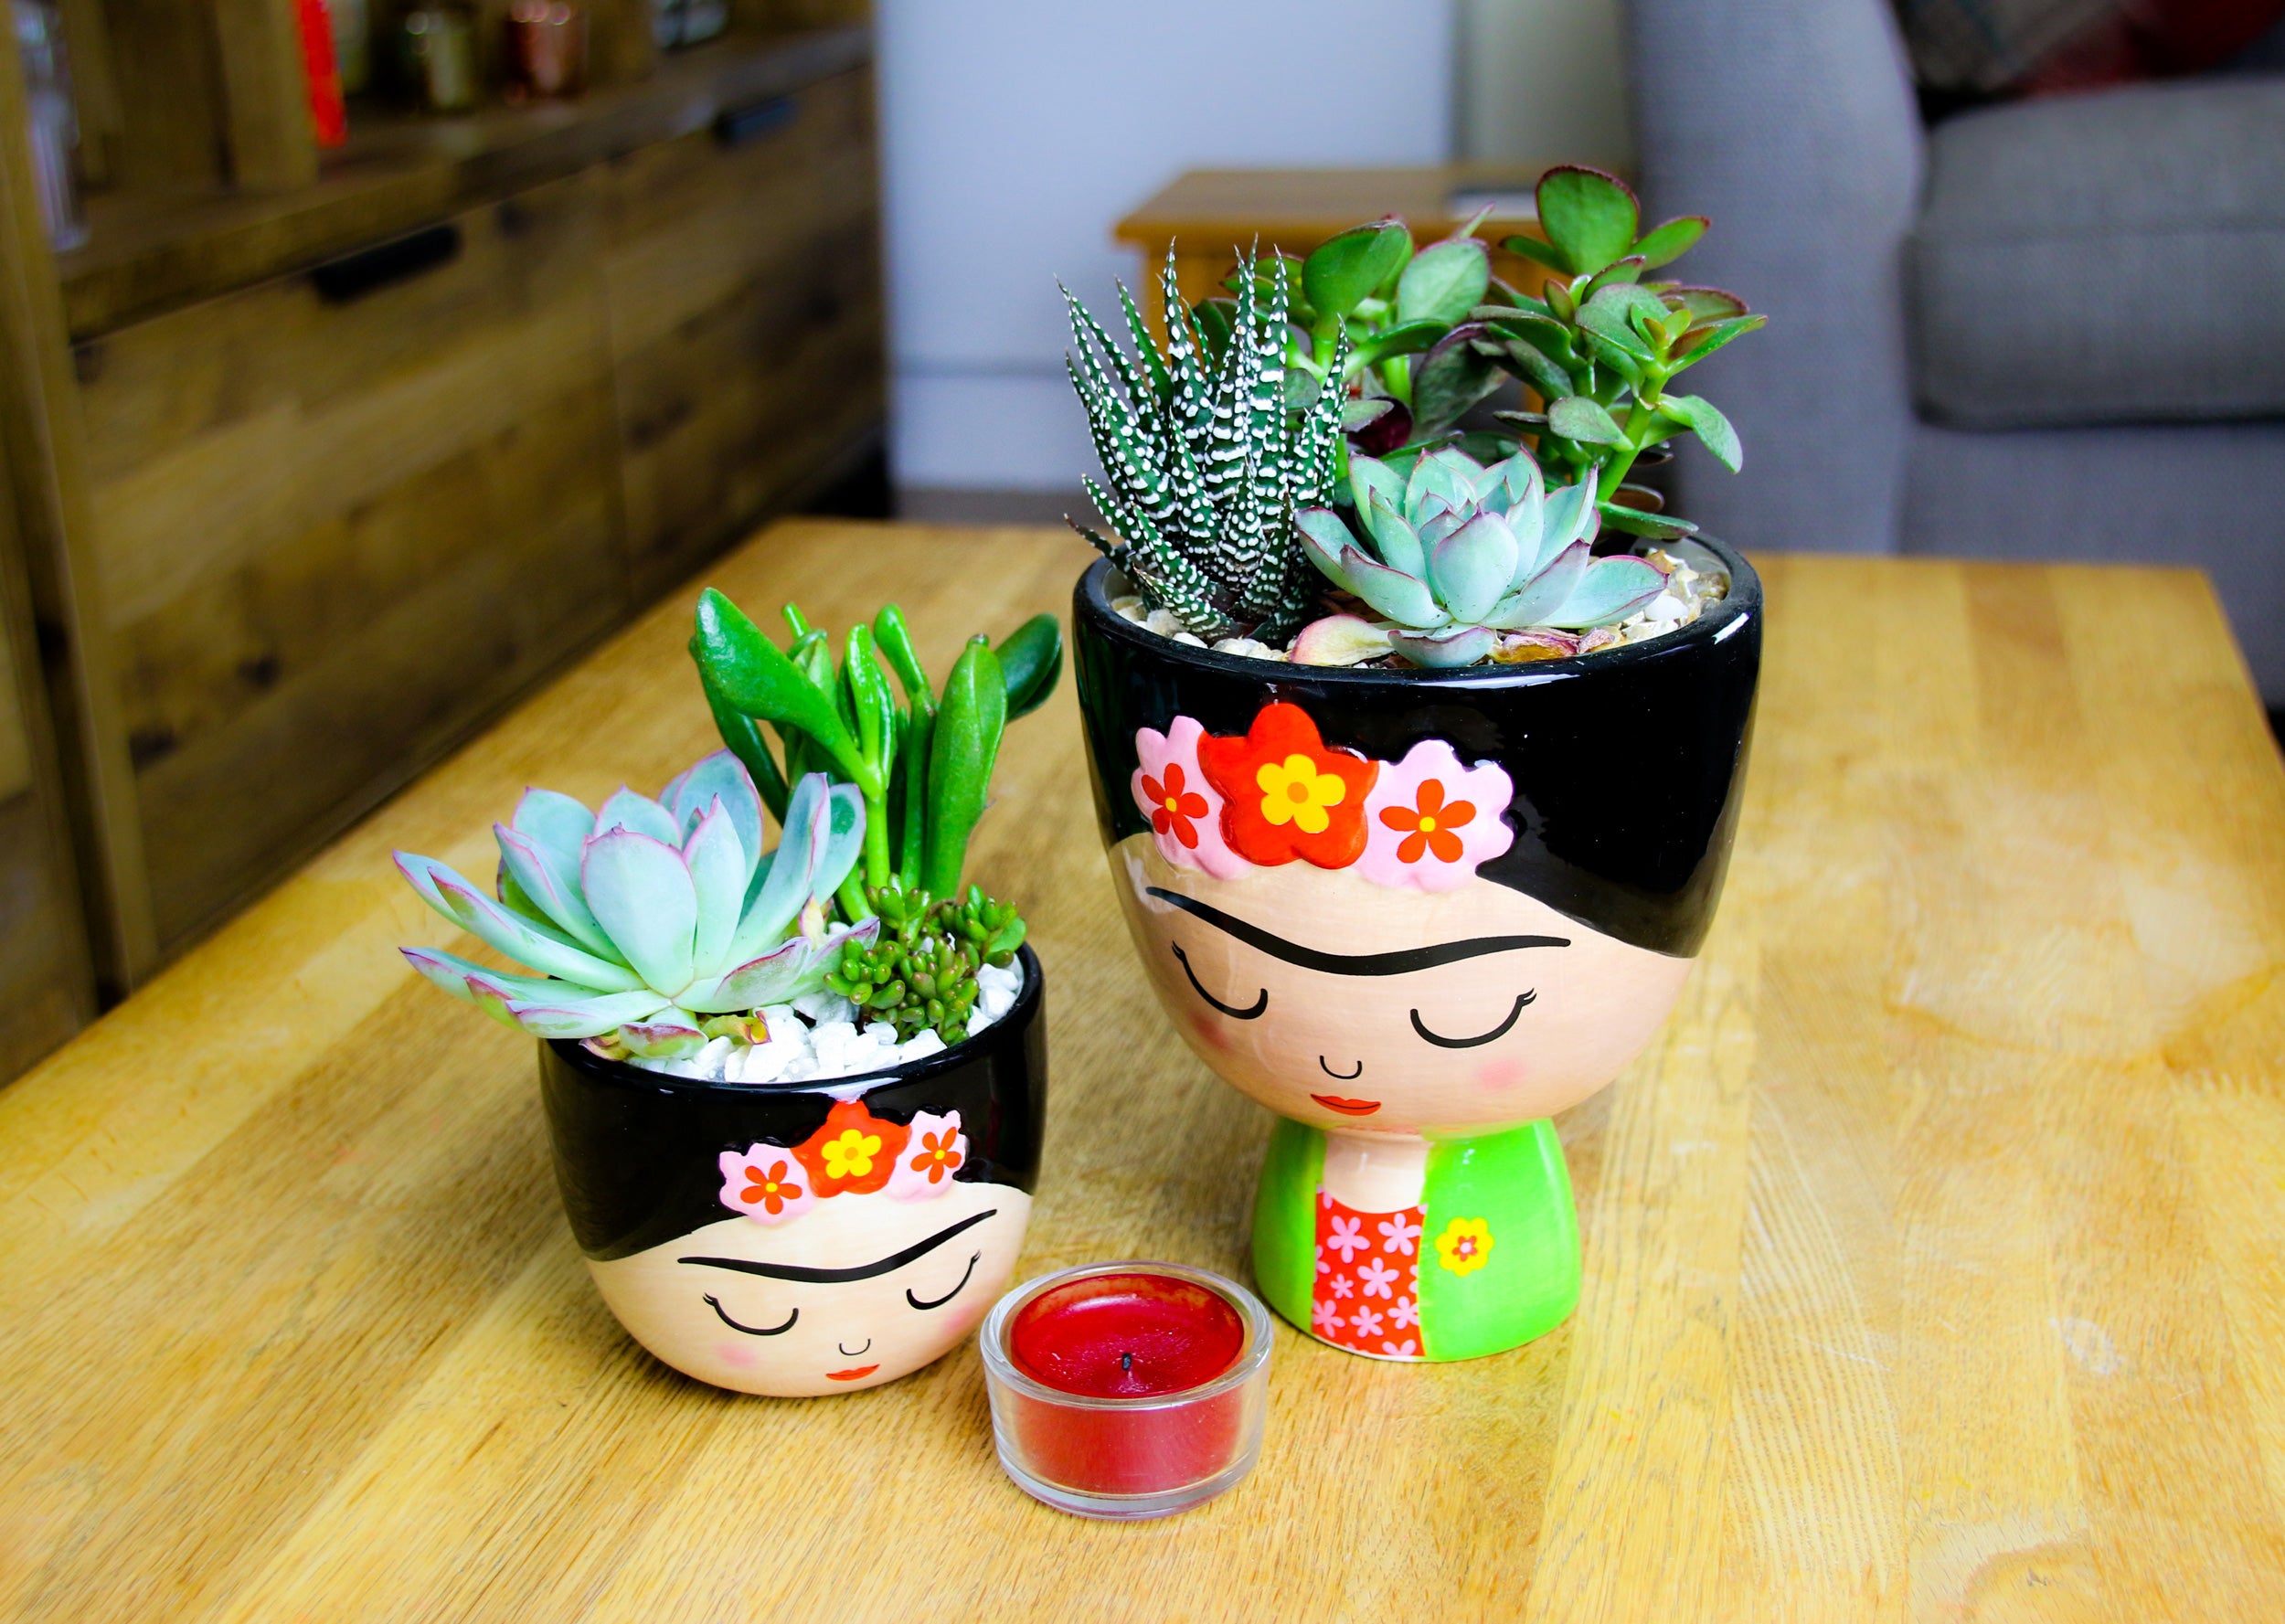 Character planters with real plants - birthday gift ideas with plants